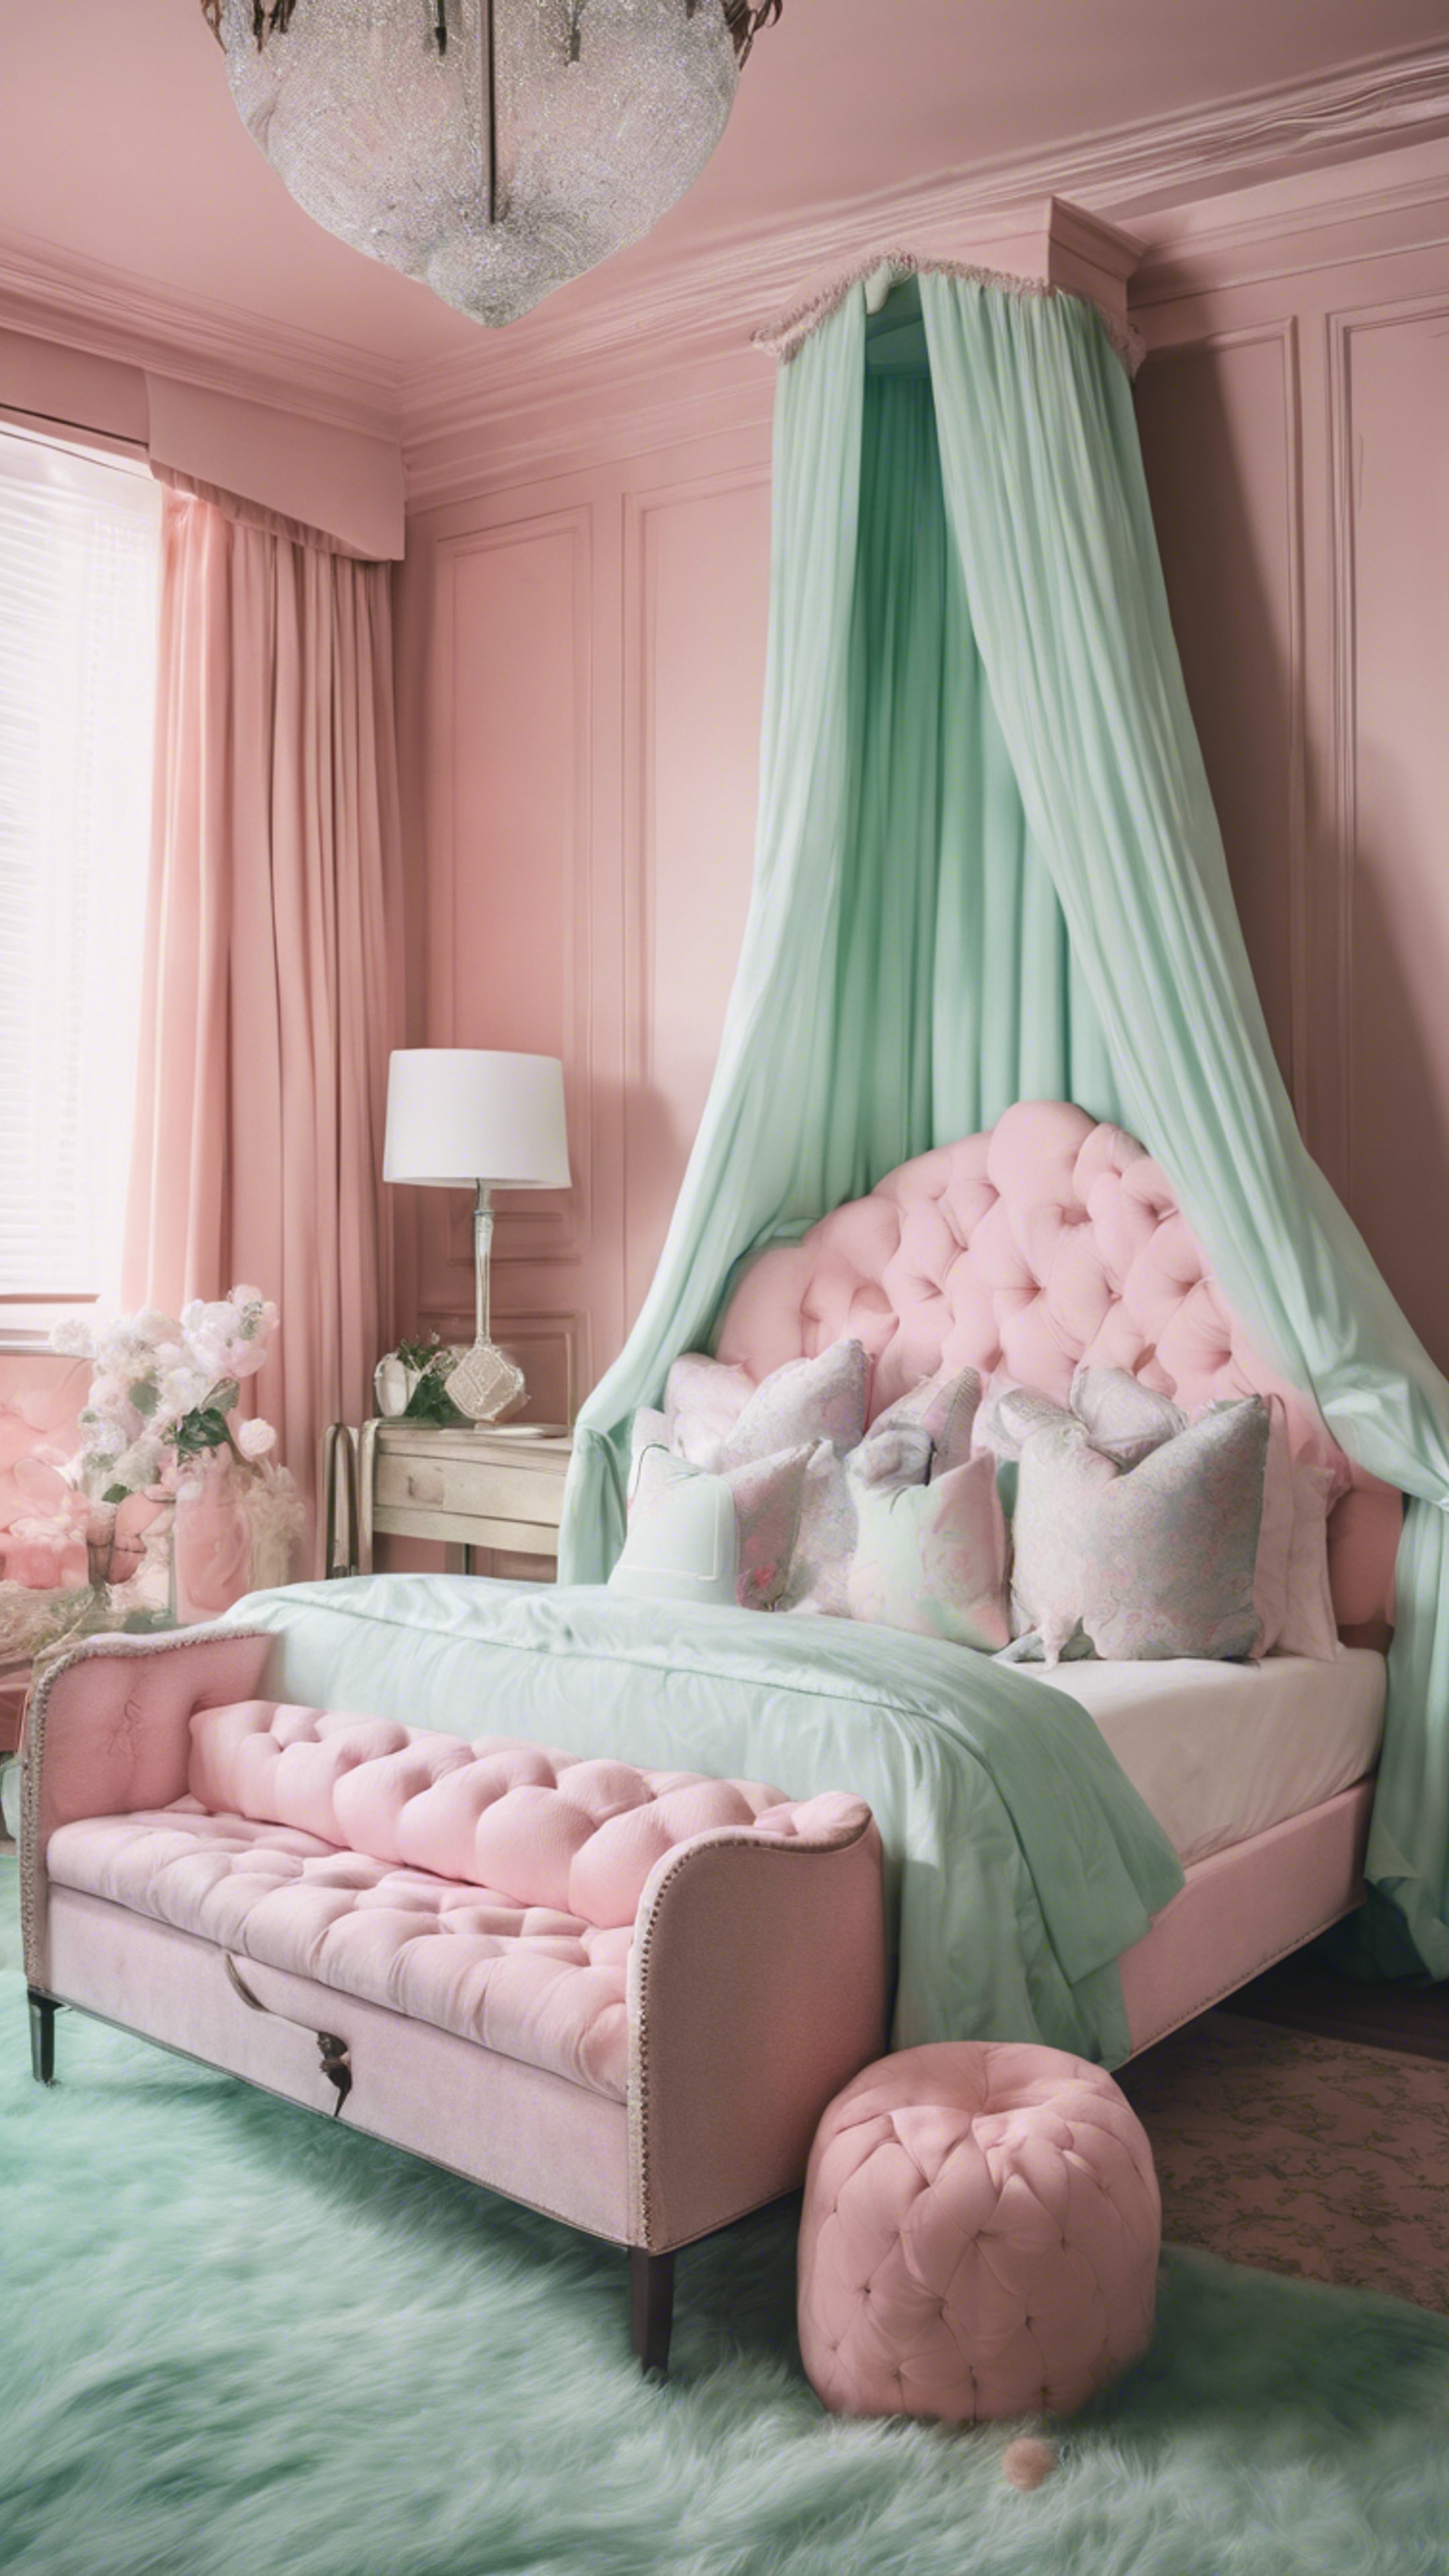 A sprawling pink and mint green preppy-style bedroom with a canopy bed and monogrammed pillows. 벽지[80ed71ae36e84fc093e2]